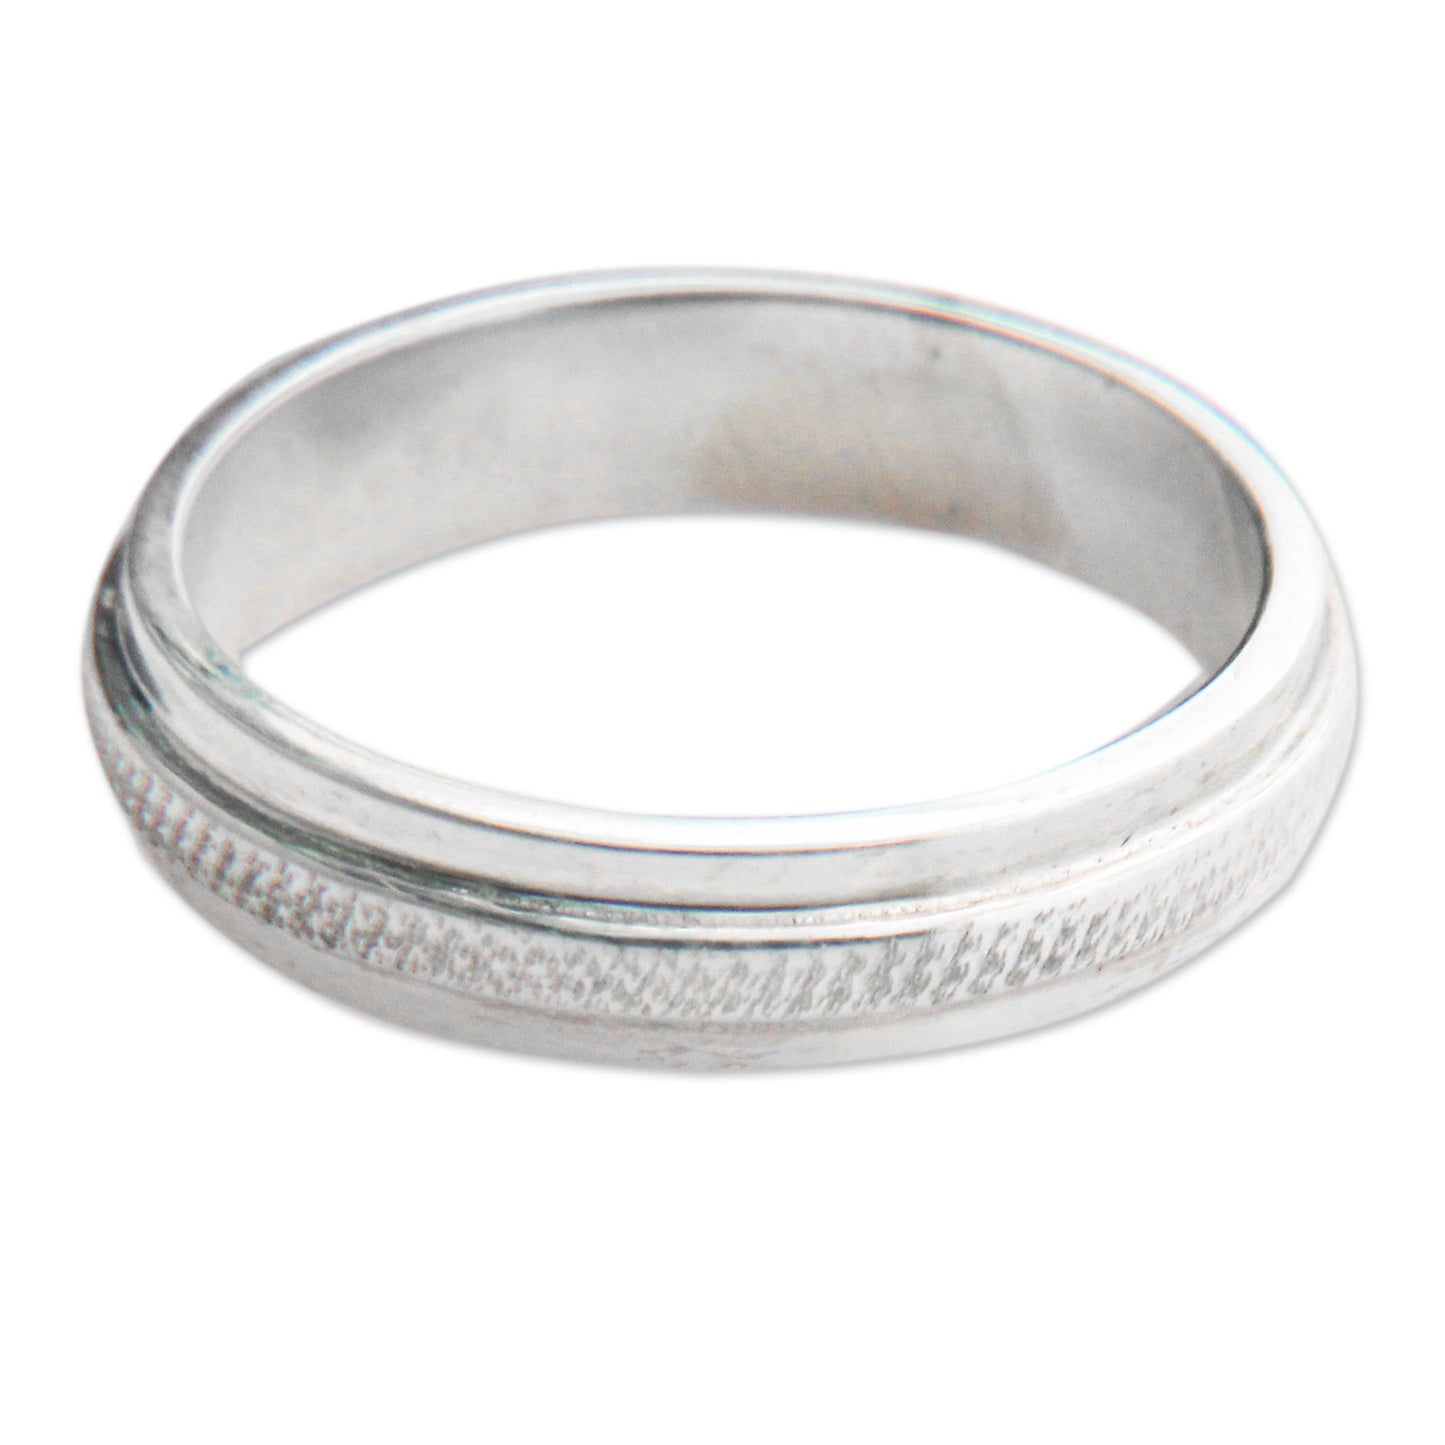 Artful Fair Trade Artisan Jewelry Sterling Silver Band Ring